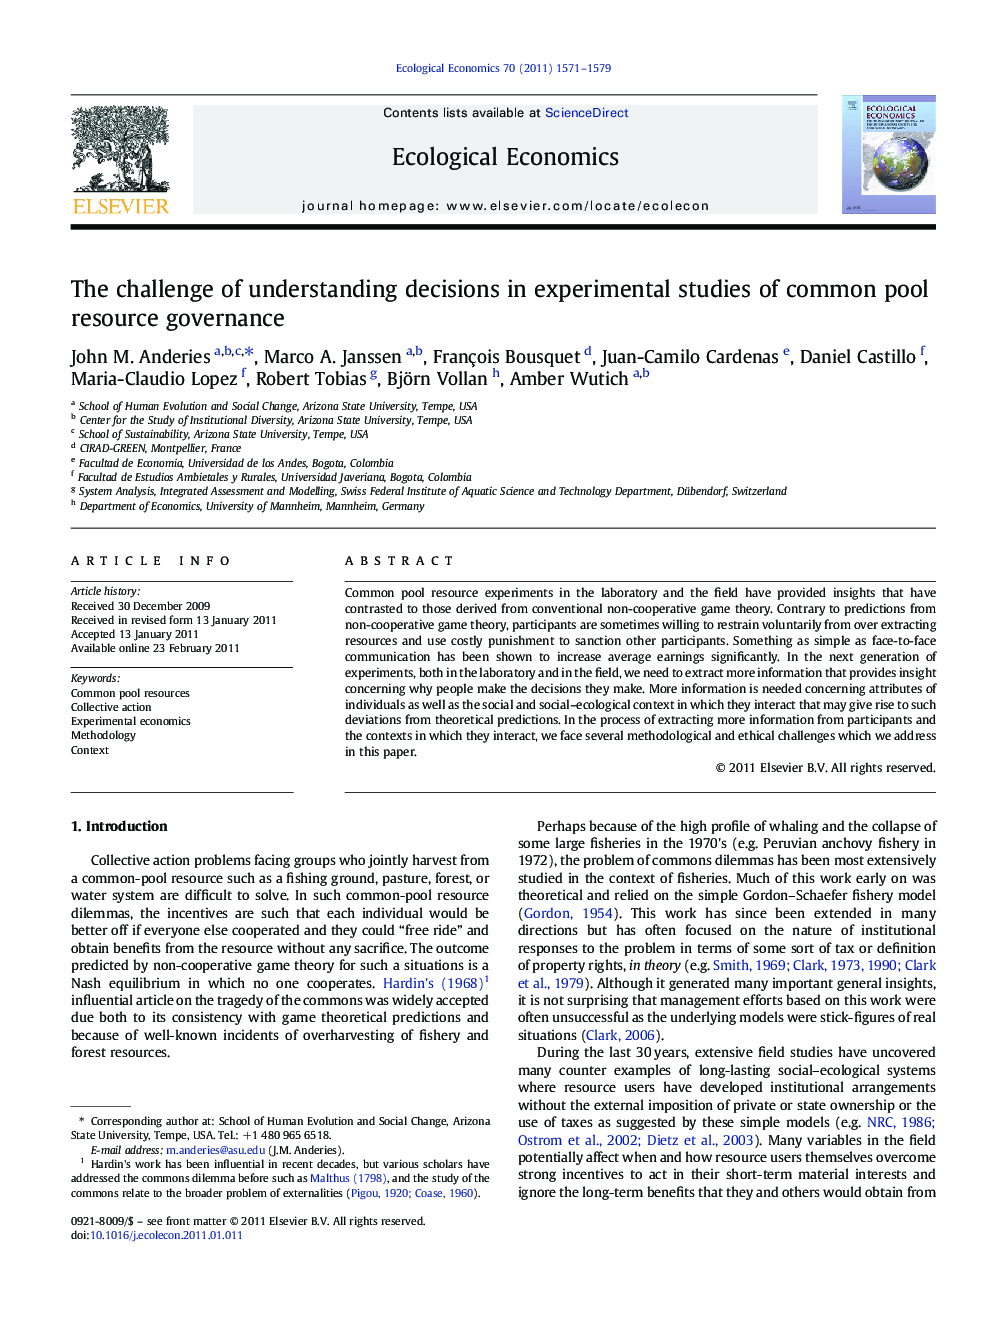 The challenge of understanding decisions in experimental studies of common pool resource governance